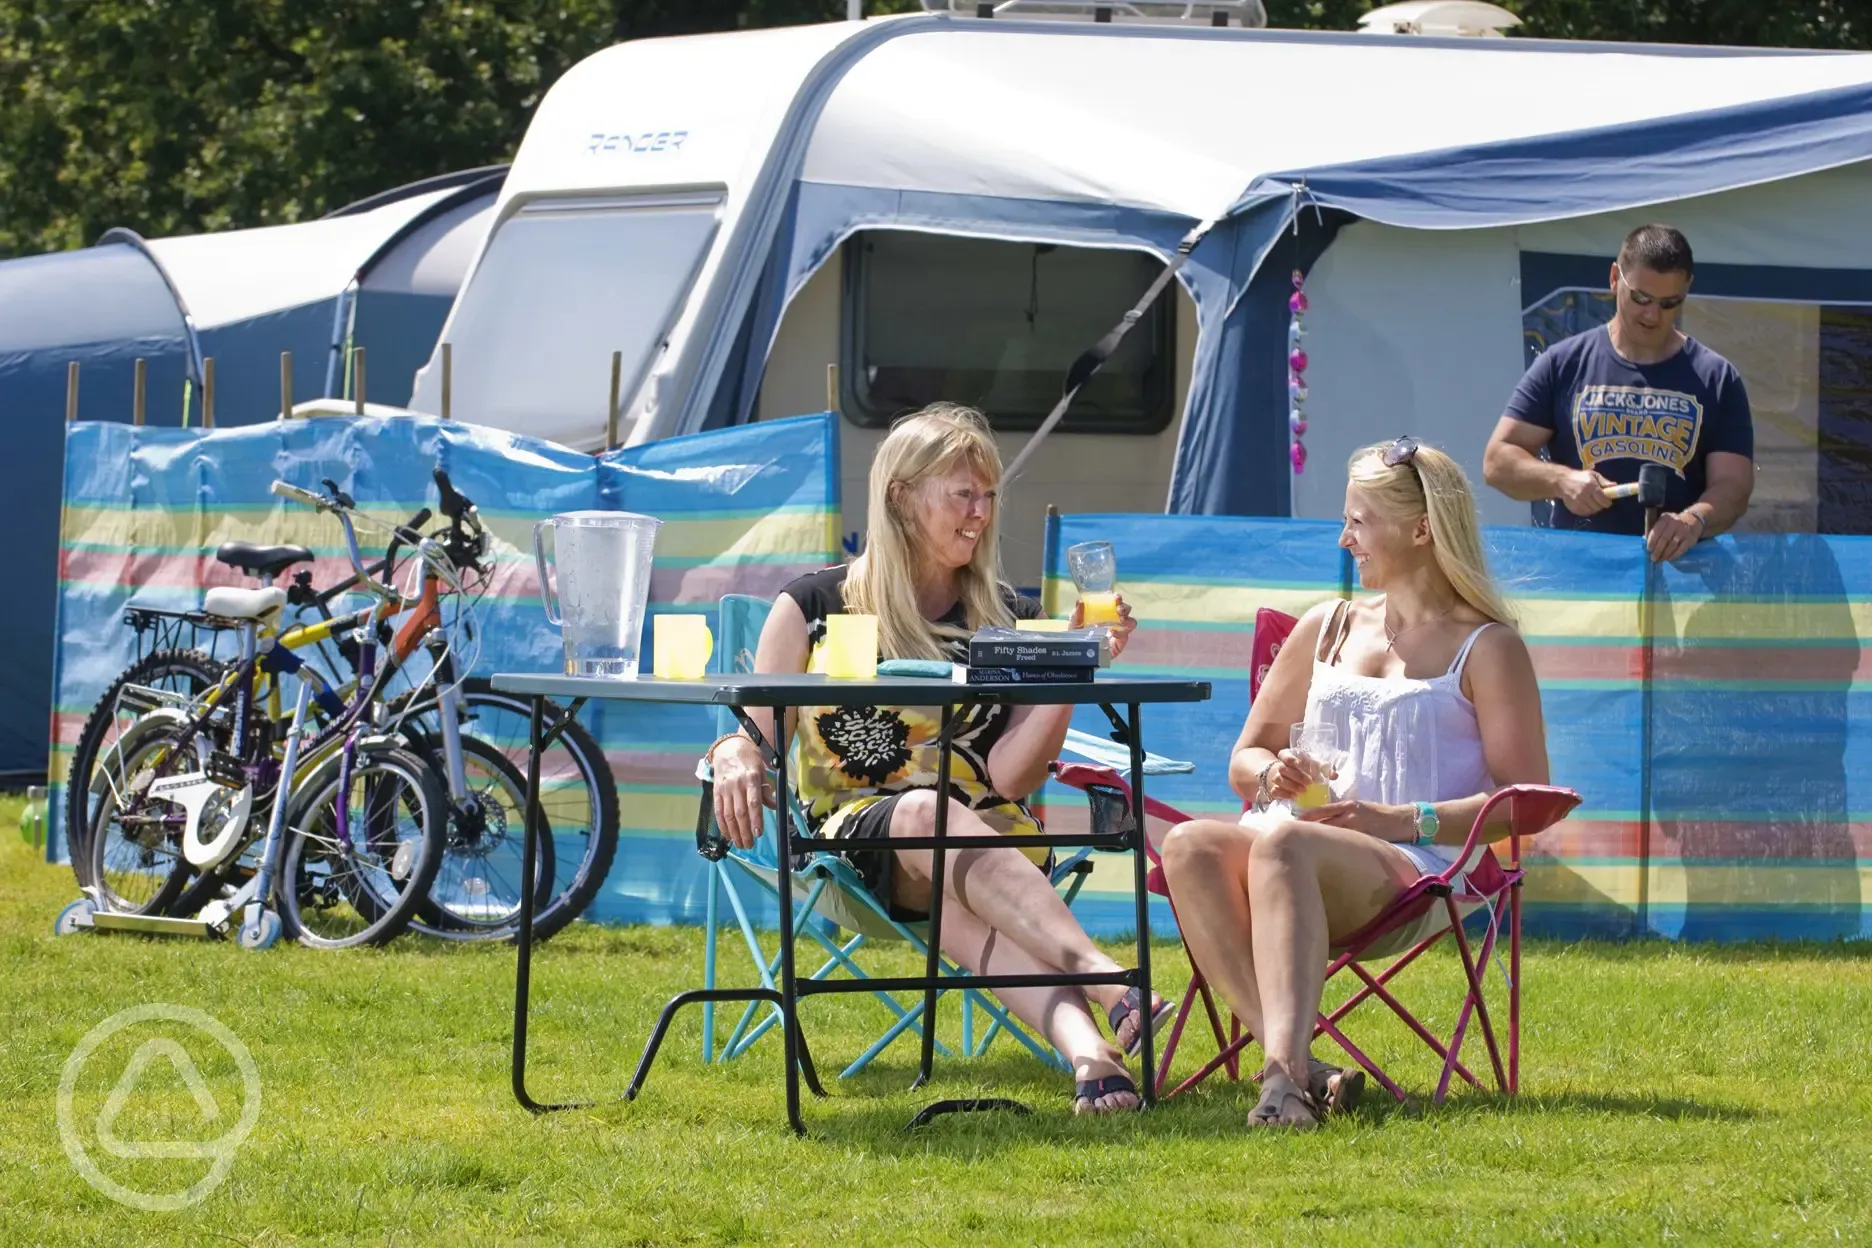 Crealy Theme Park & Resort starring in the new season of 'Happy Campers:  The Caravan Park' on Channel 5.